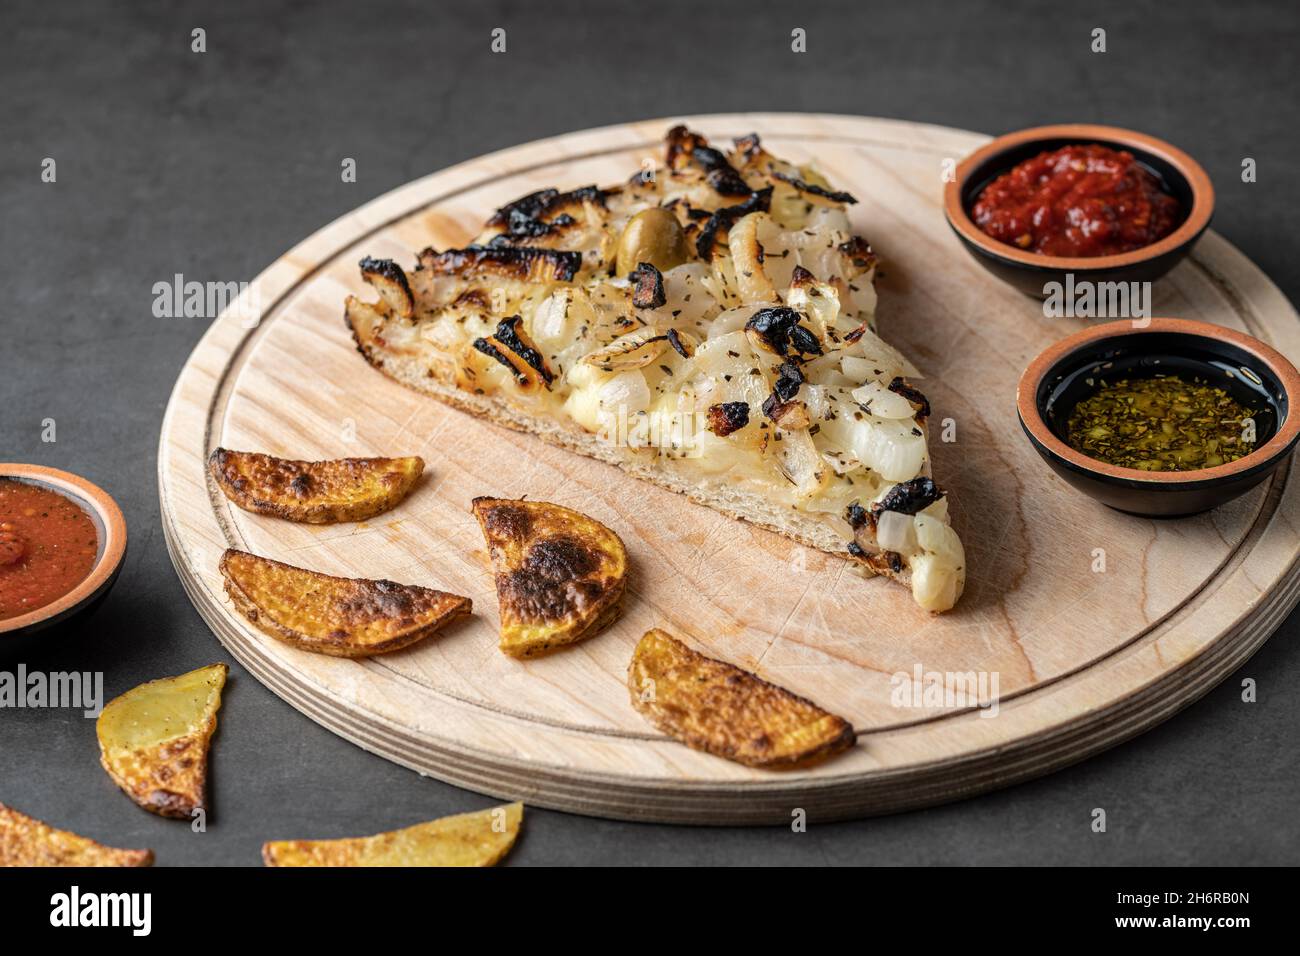 Handmade Argentinian pizza with onions on dark stone background. Stock Photo